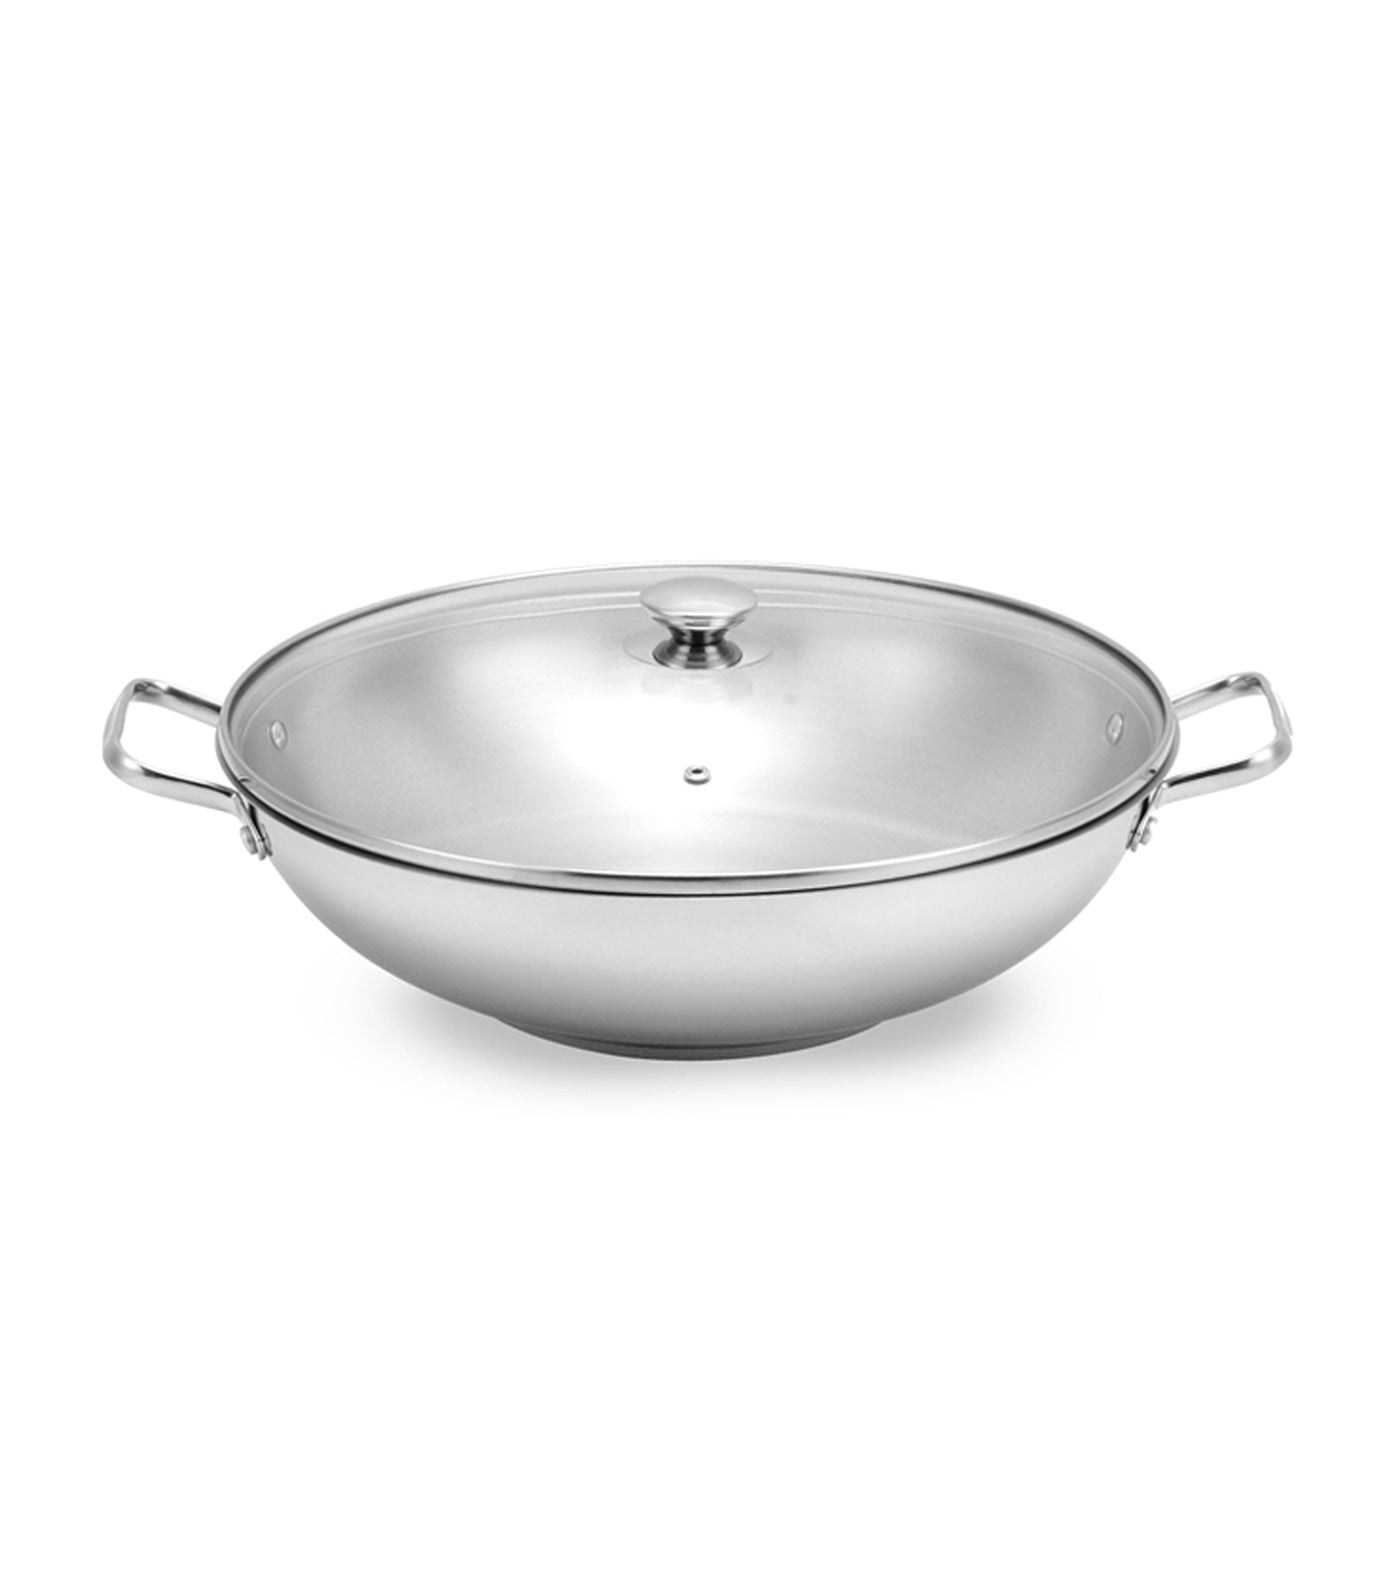 lifestyle silver stainless steel wok with glass cover